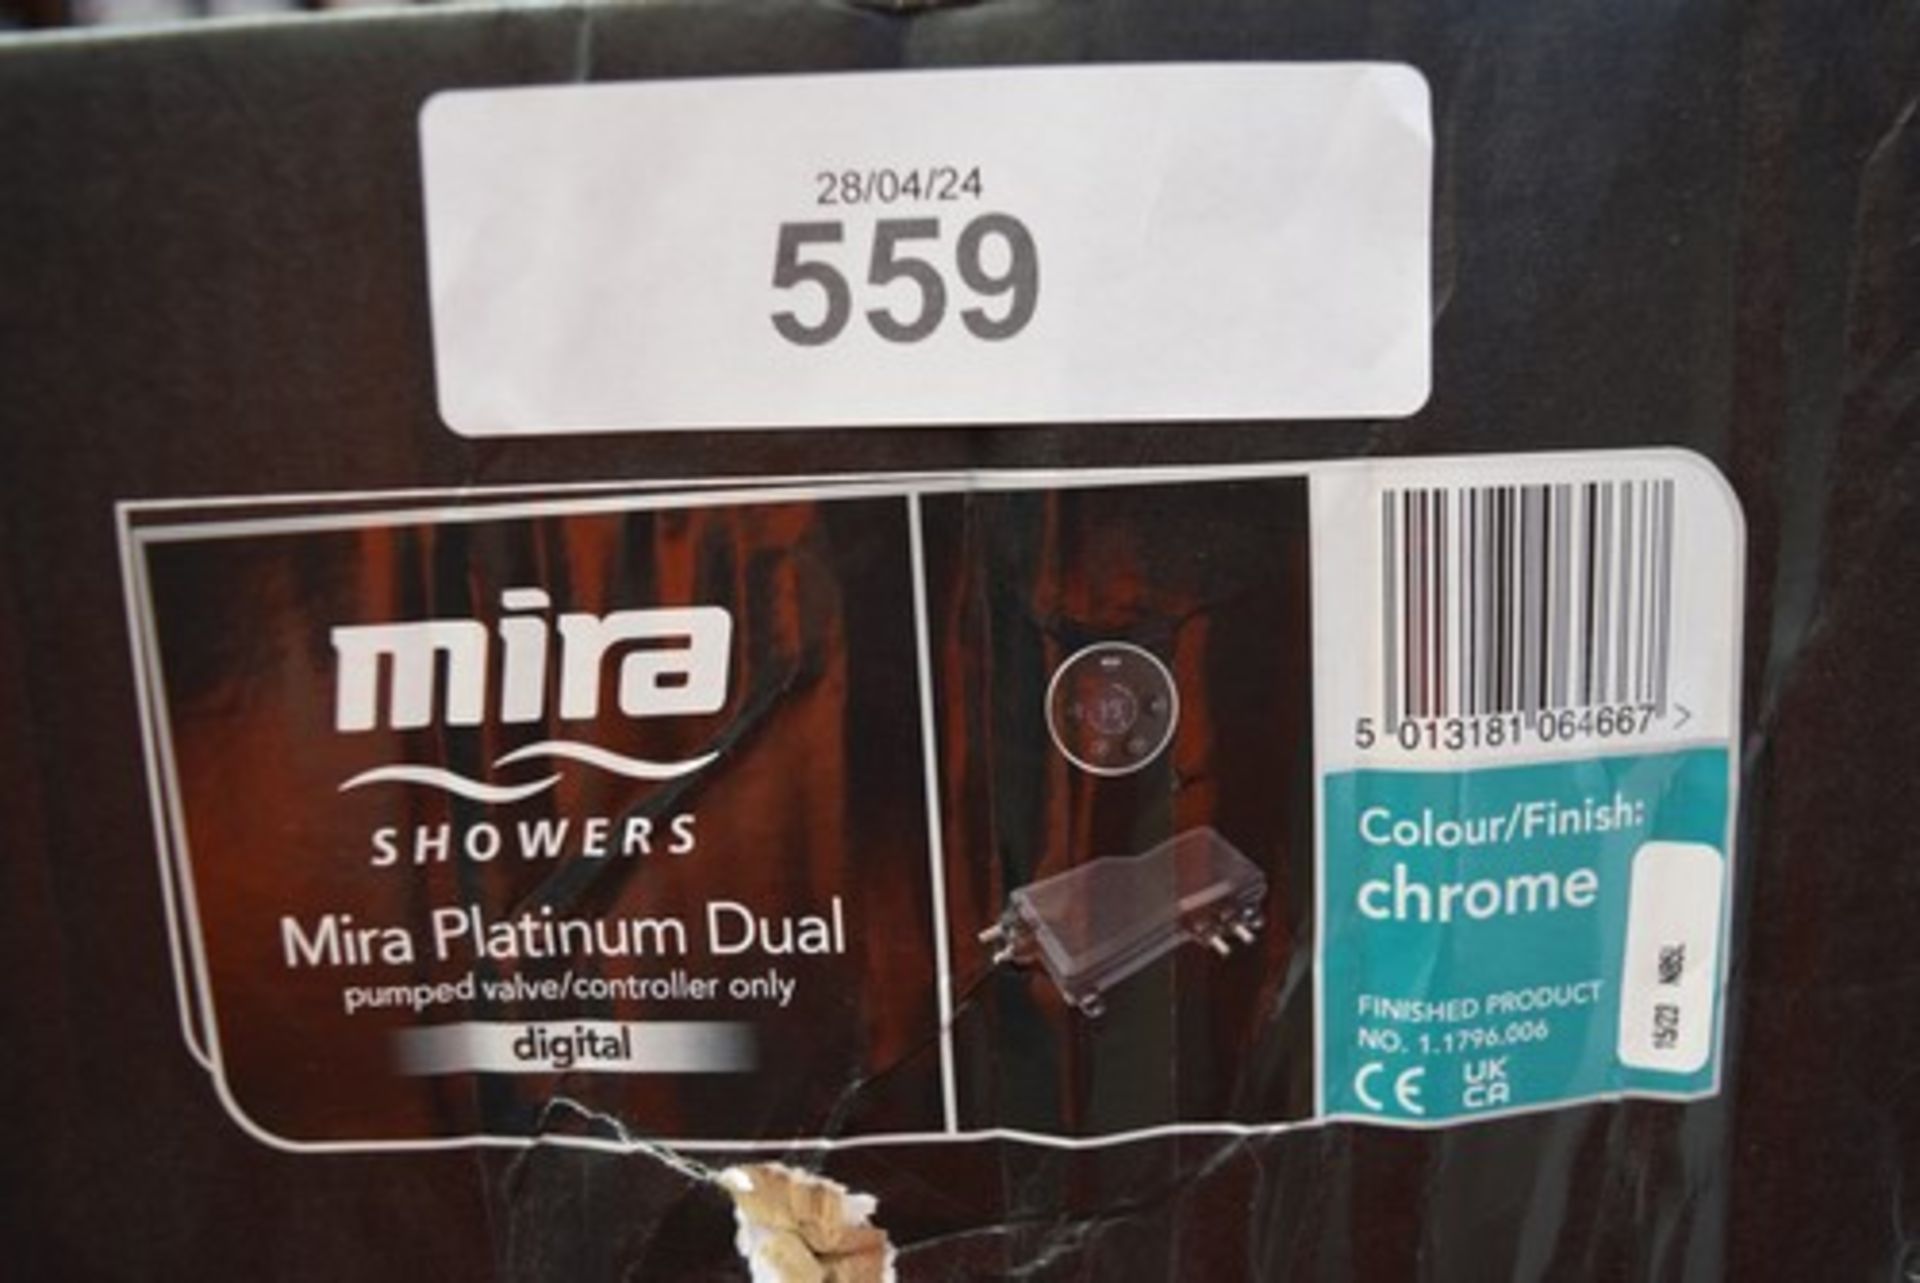 1 x Mira Platinum dual pumped valve/controller only, code 1.1796.006, EAN 5013181064667 - new in - Image 3 of 3